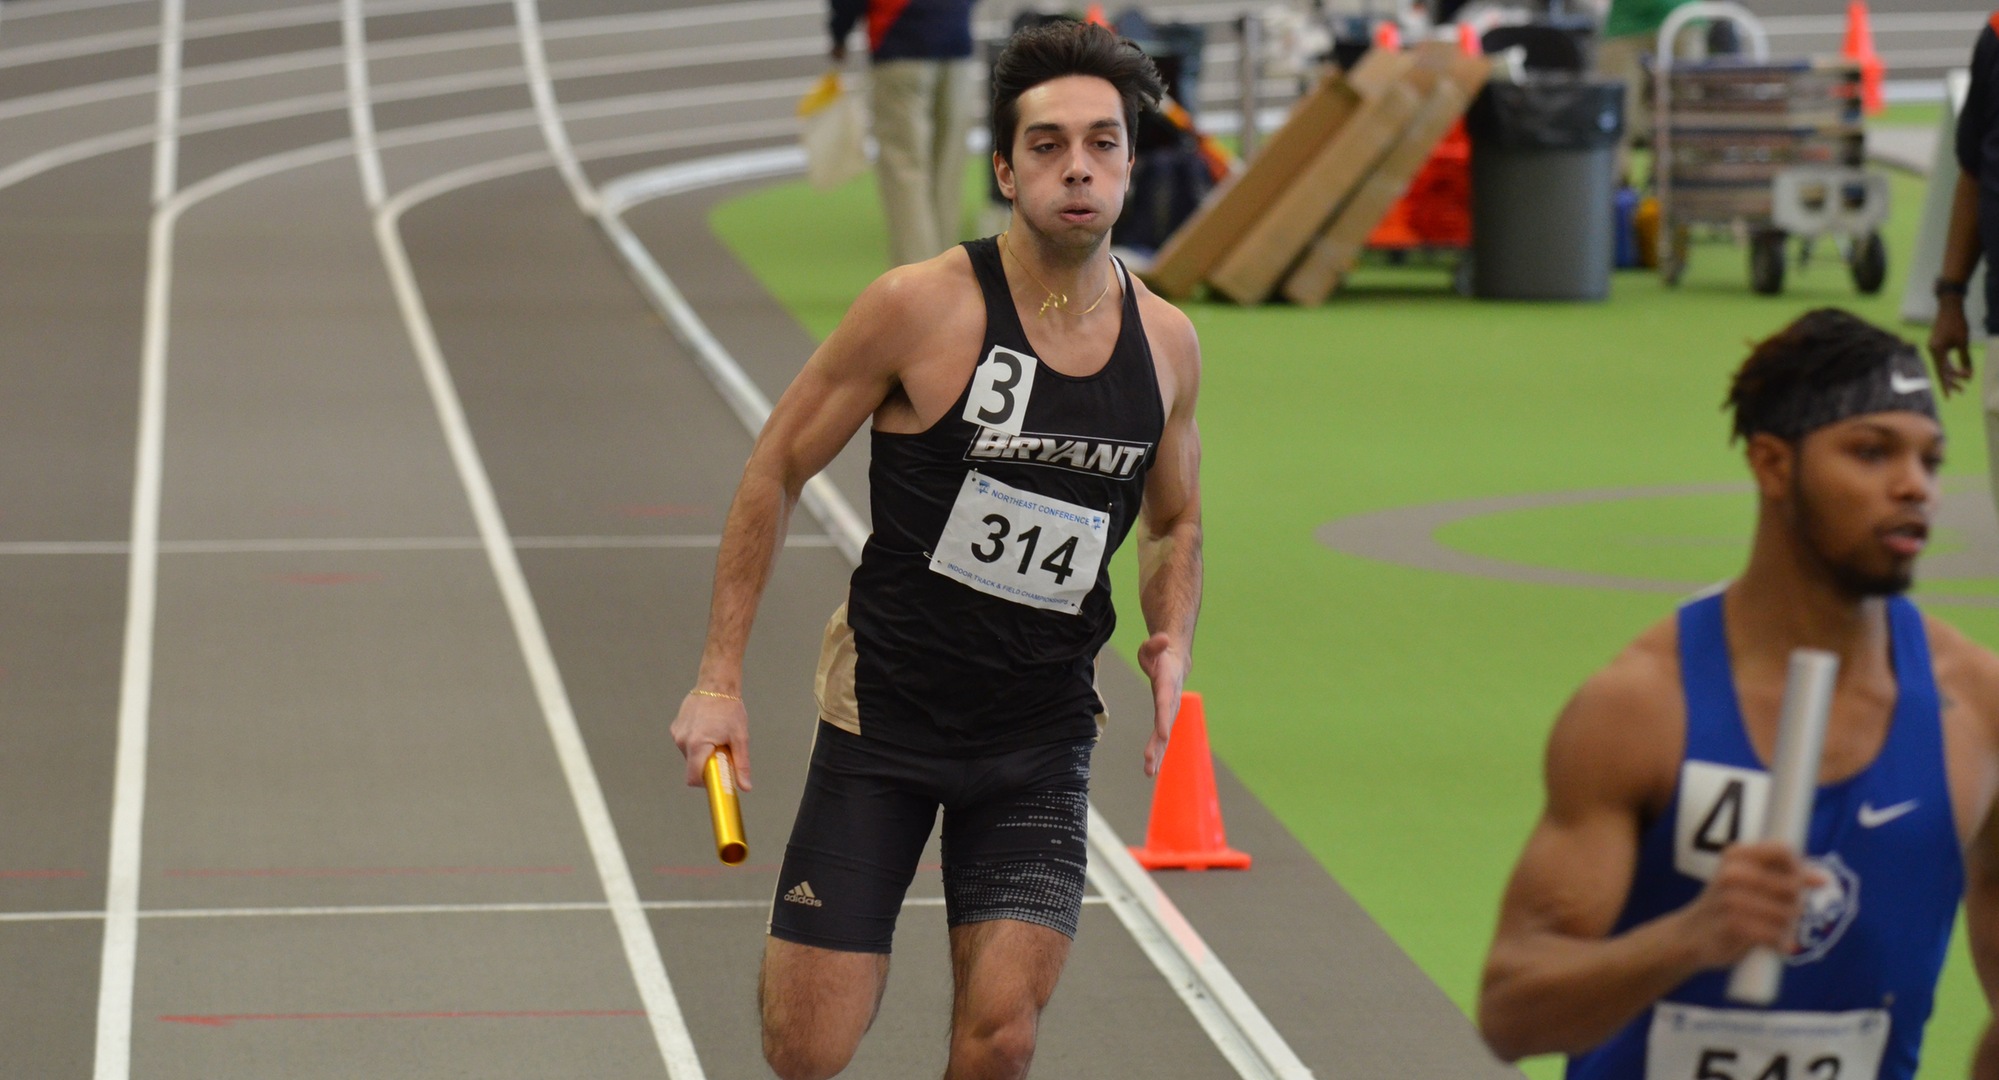 Bryant enters URI Coaches Tribute Meet in final indoor tune-up